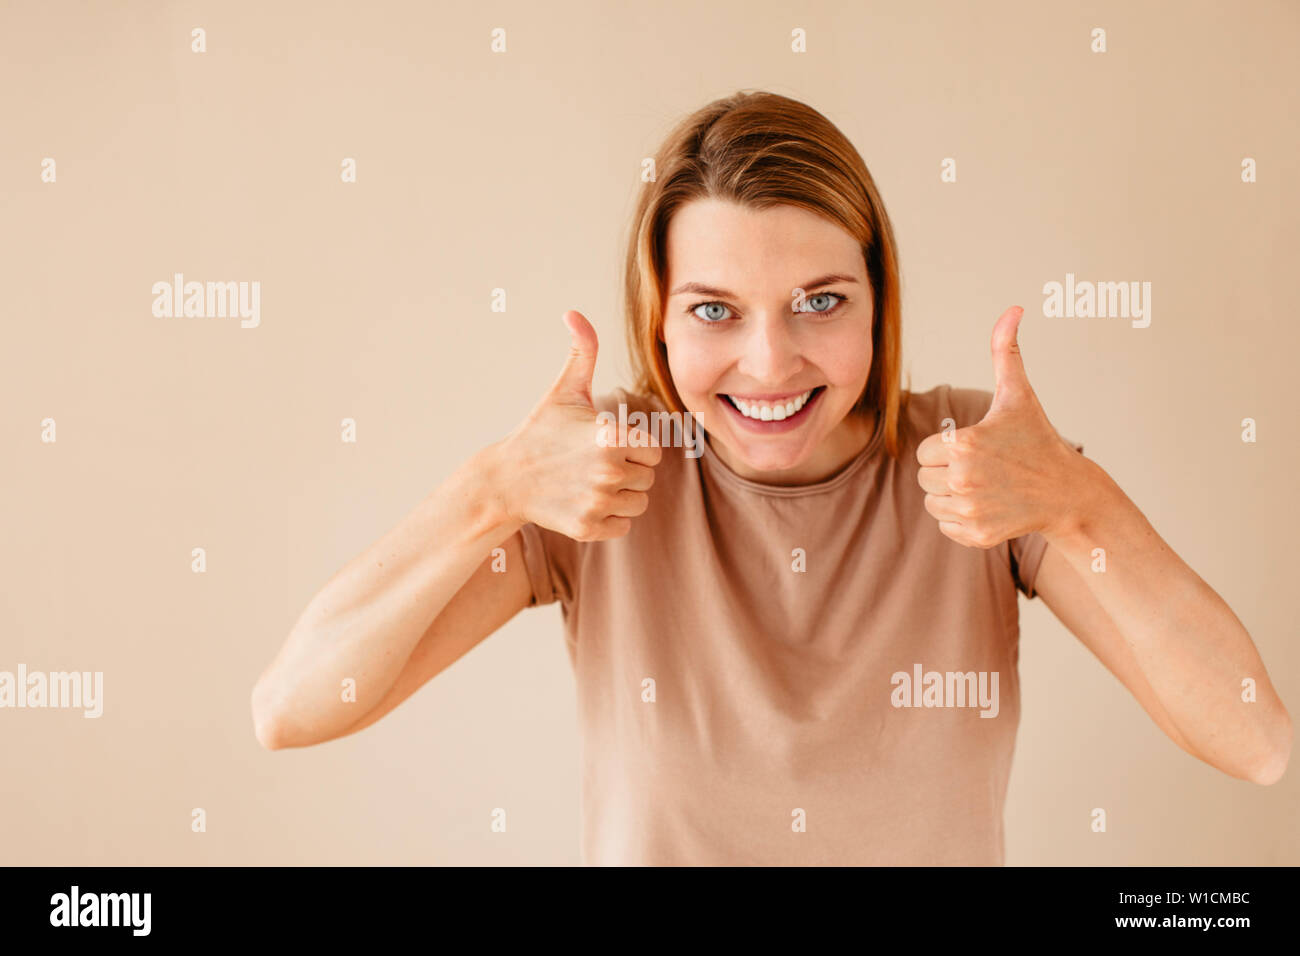 Excited woman gesturing thumb up Banque D'Images